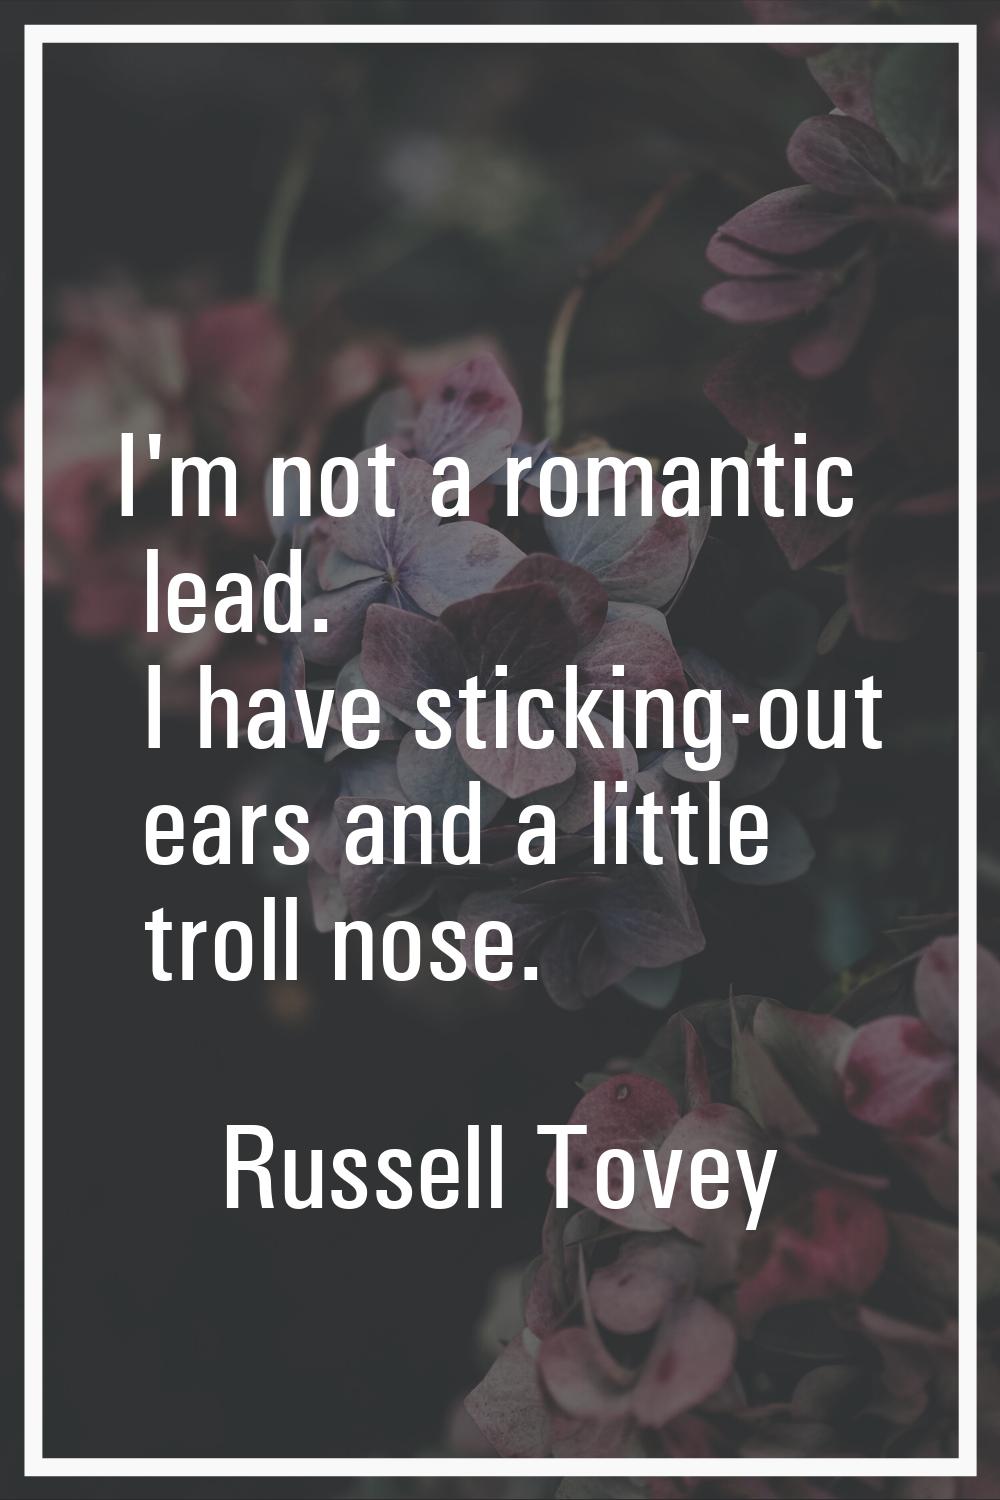 I'm not a romantic lead. I have sticking-out ears and a little troll nose.